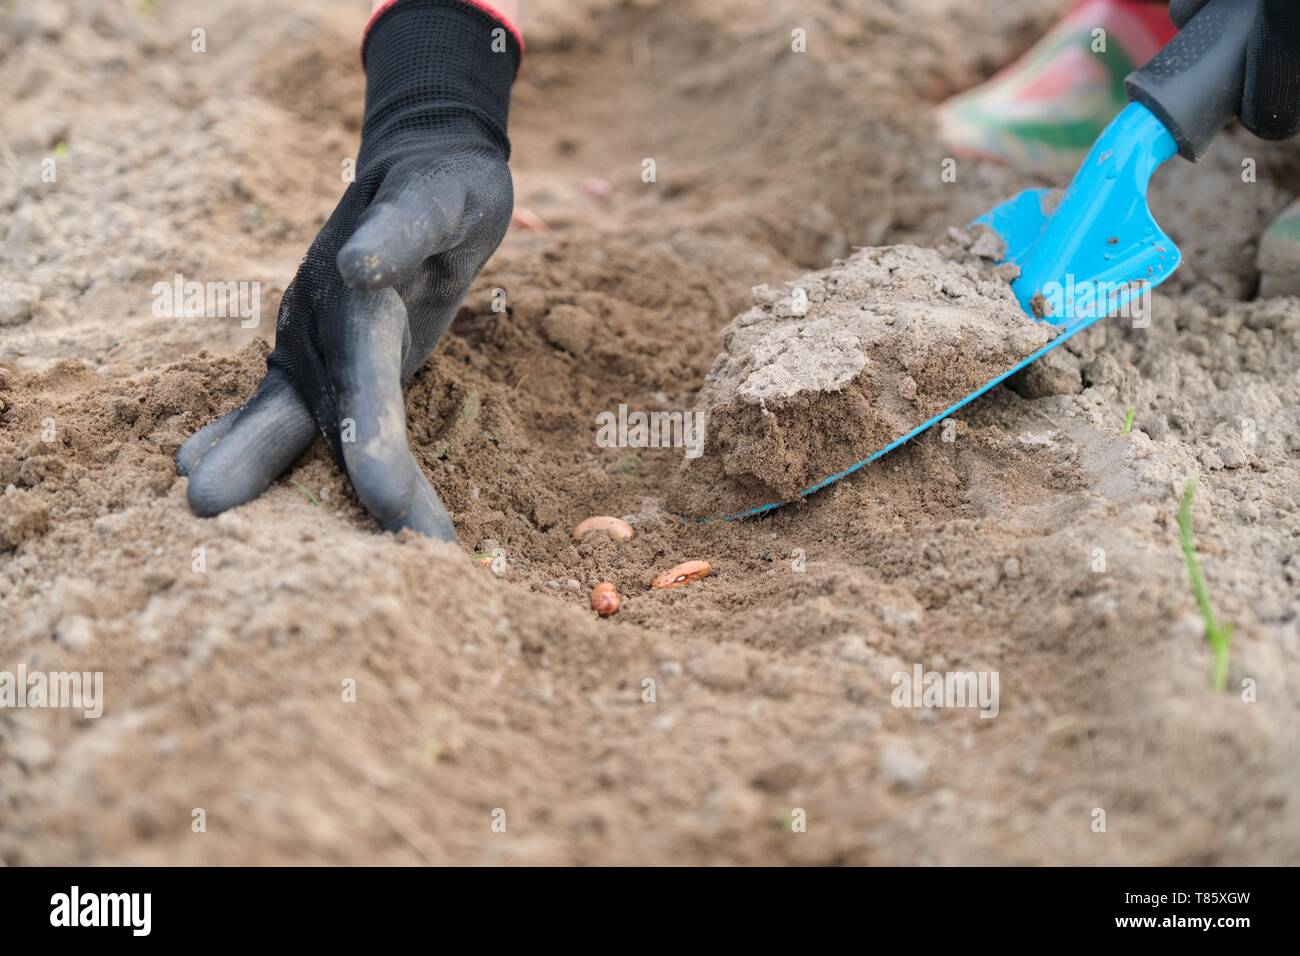 Spring planting seeds of legumes beans. Close up of woman hand in gloves with garden tools working with ground. Stock Photo